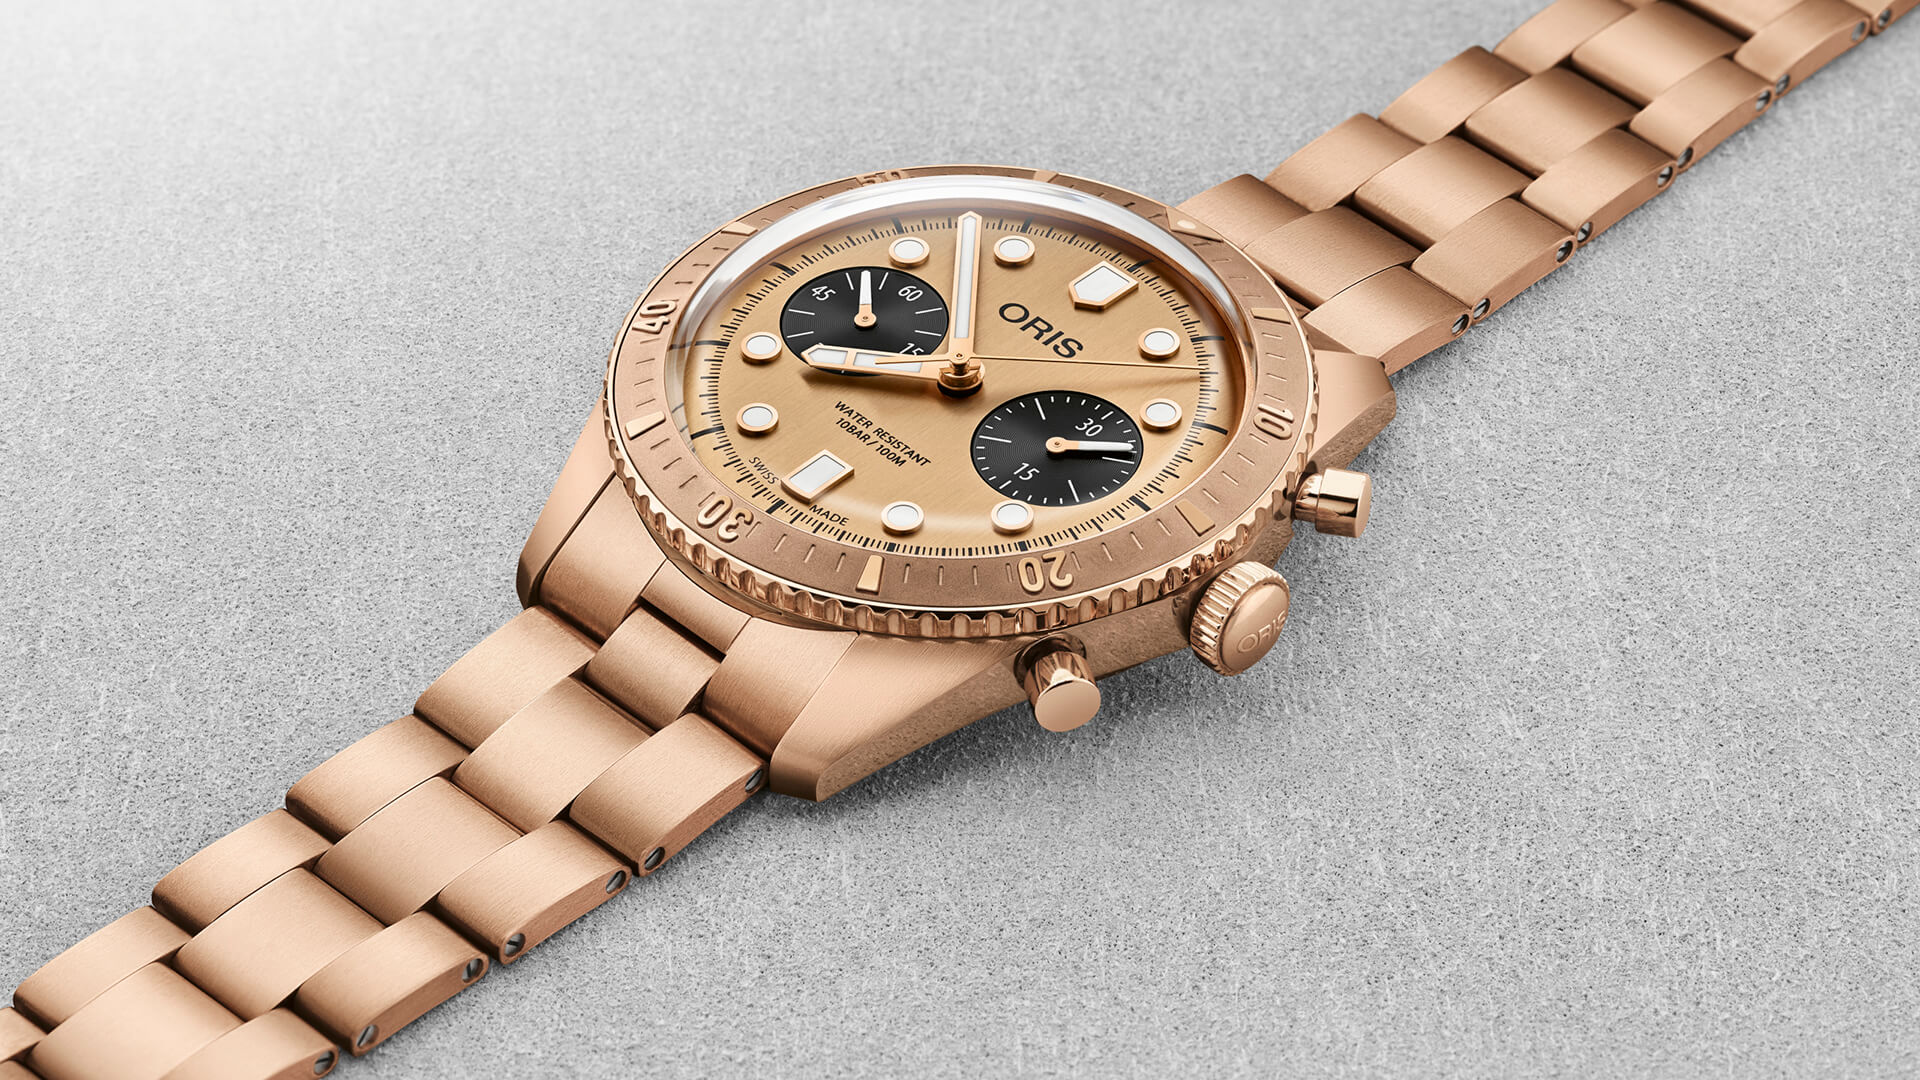 Oris Reveals New Limited Hölstein Edition 2020 Chronograph With Solid Bronze Bracelet